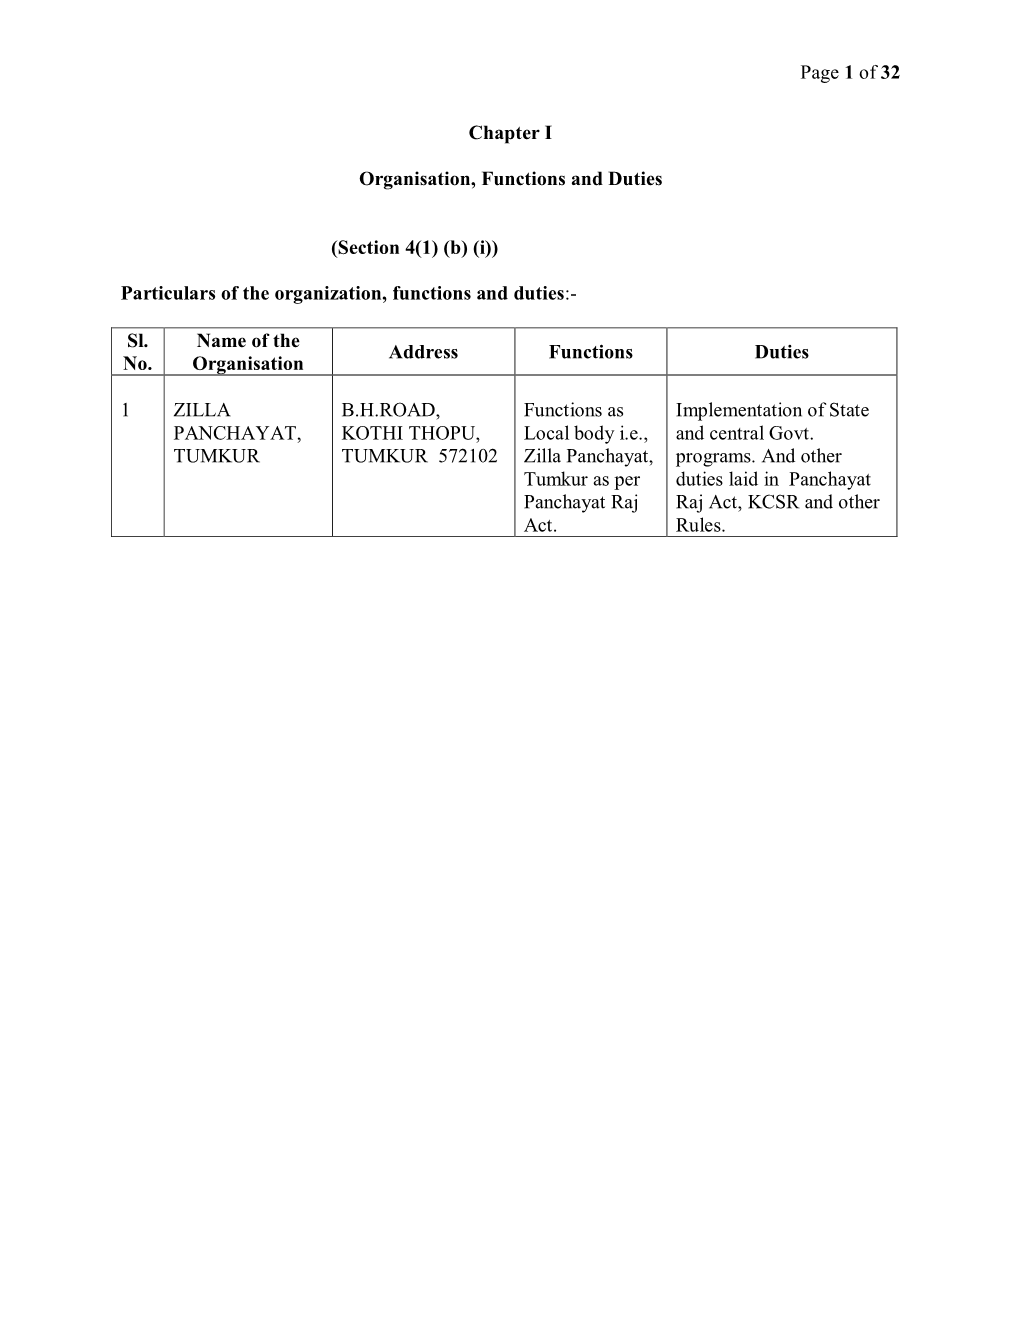 Page 1 of 32 Chapter I Organisation, Functions and Duties (Section 4(1